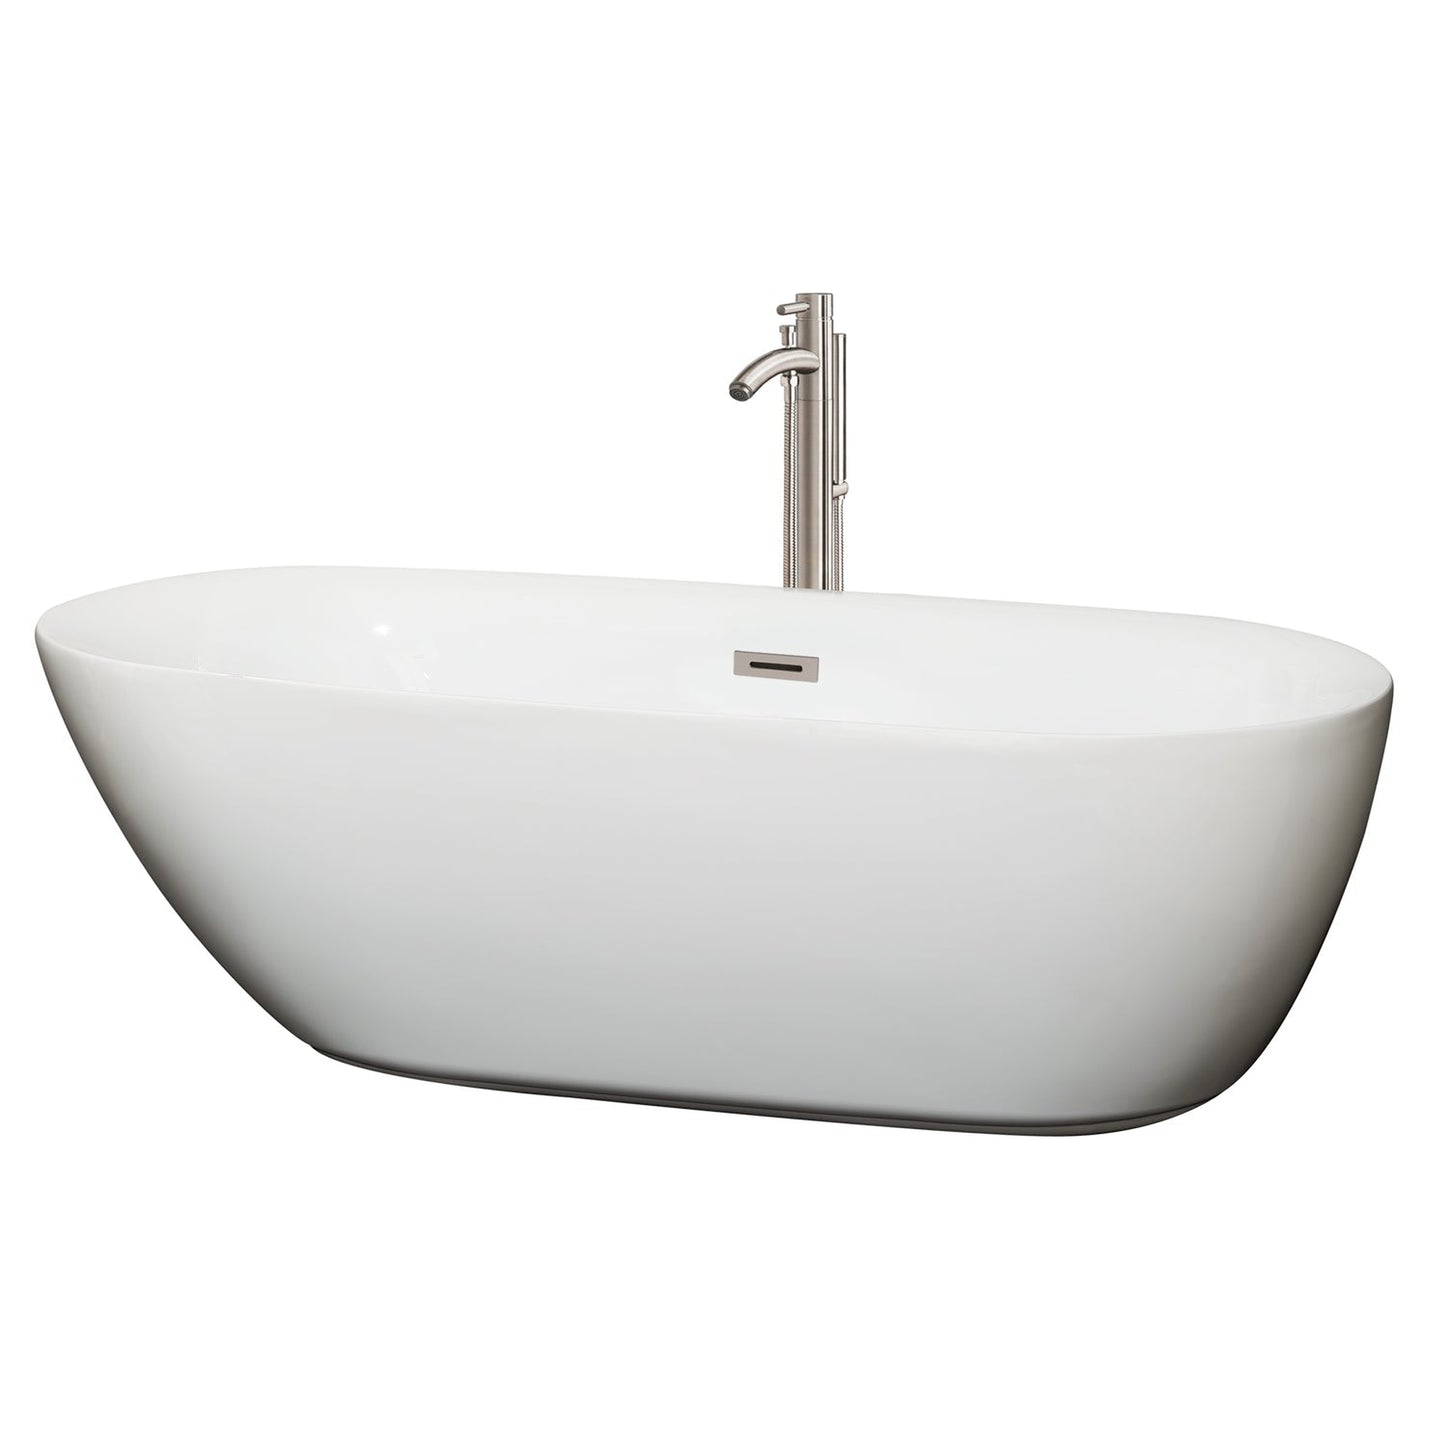 Wyndham Collection Melissa 71" Freestanding Bathtub in White With Floor Mounted Faucet, Drain and Overflow Trim in Brushed Nickel